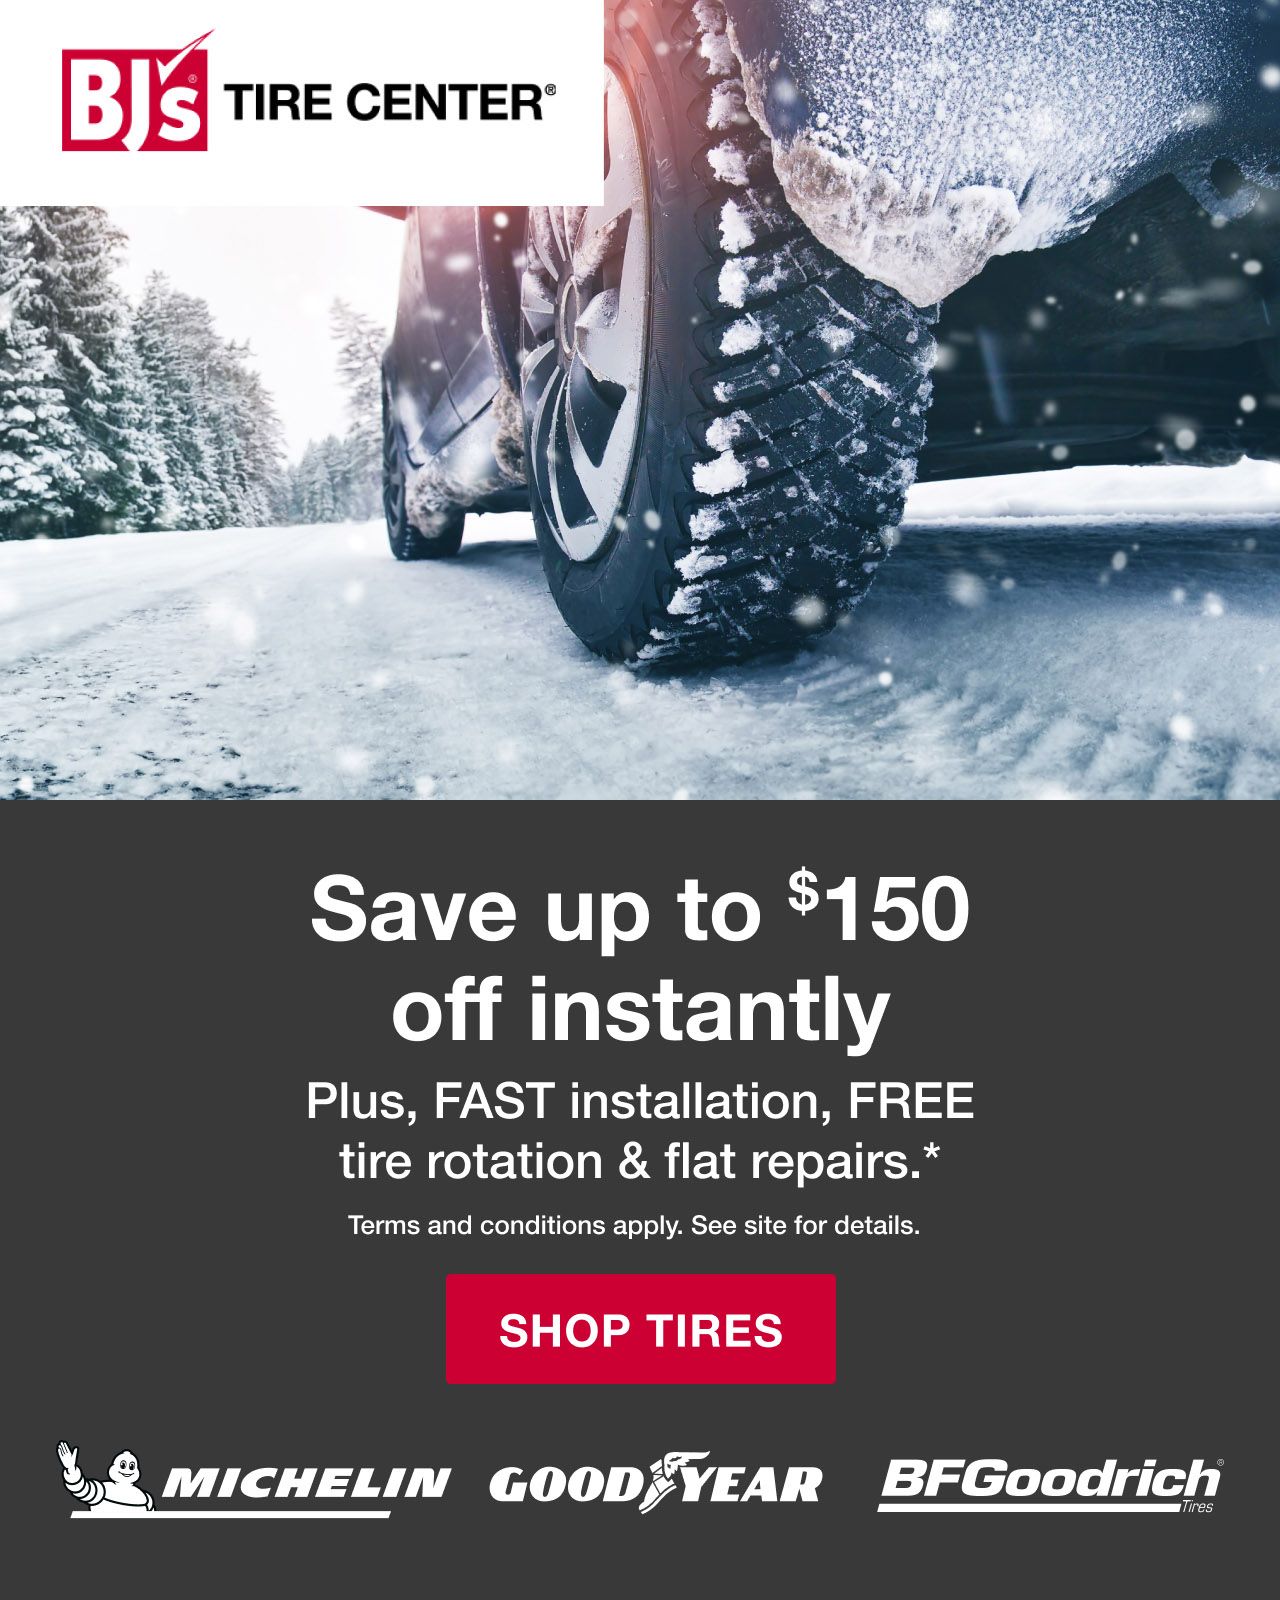 Save up to $150 off instantly. See site for details. Click to shop tires